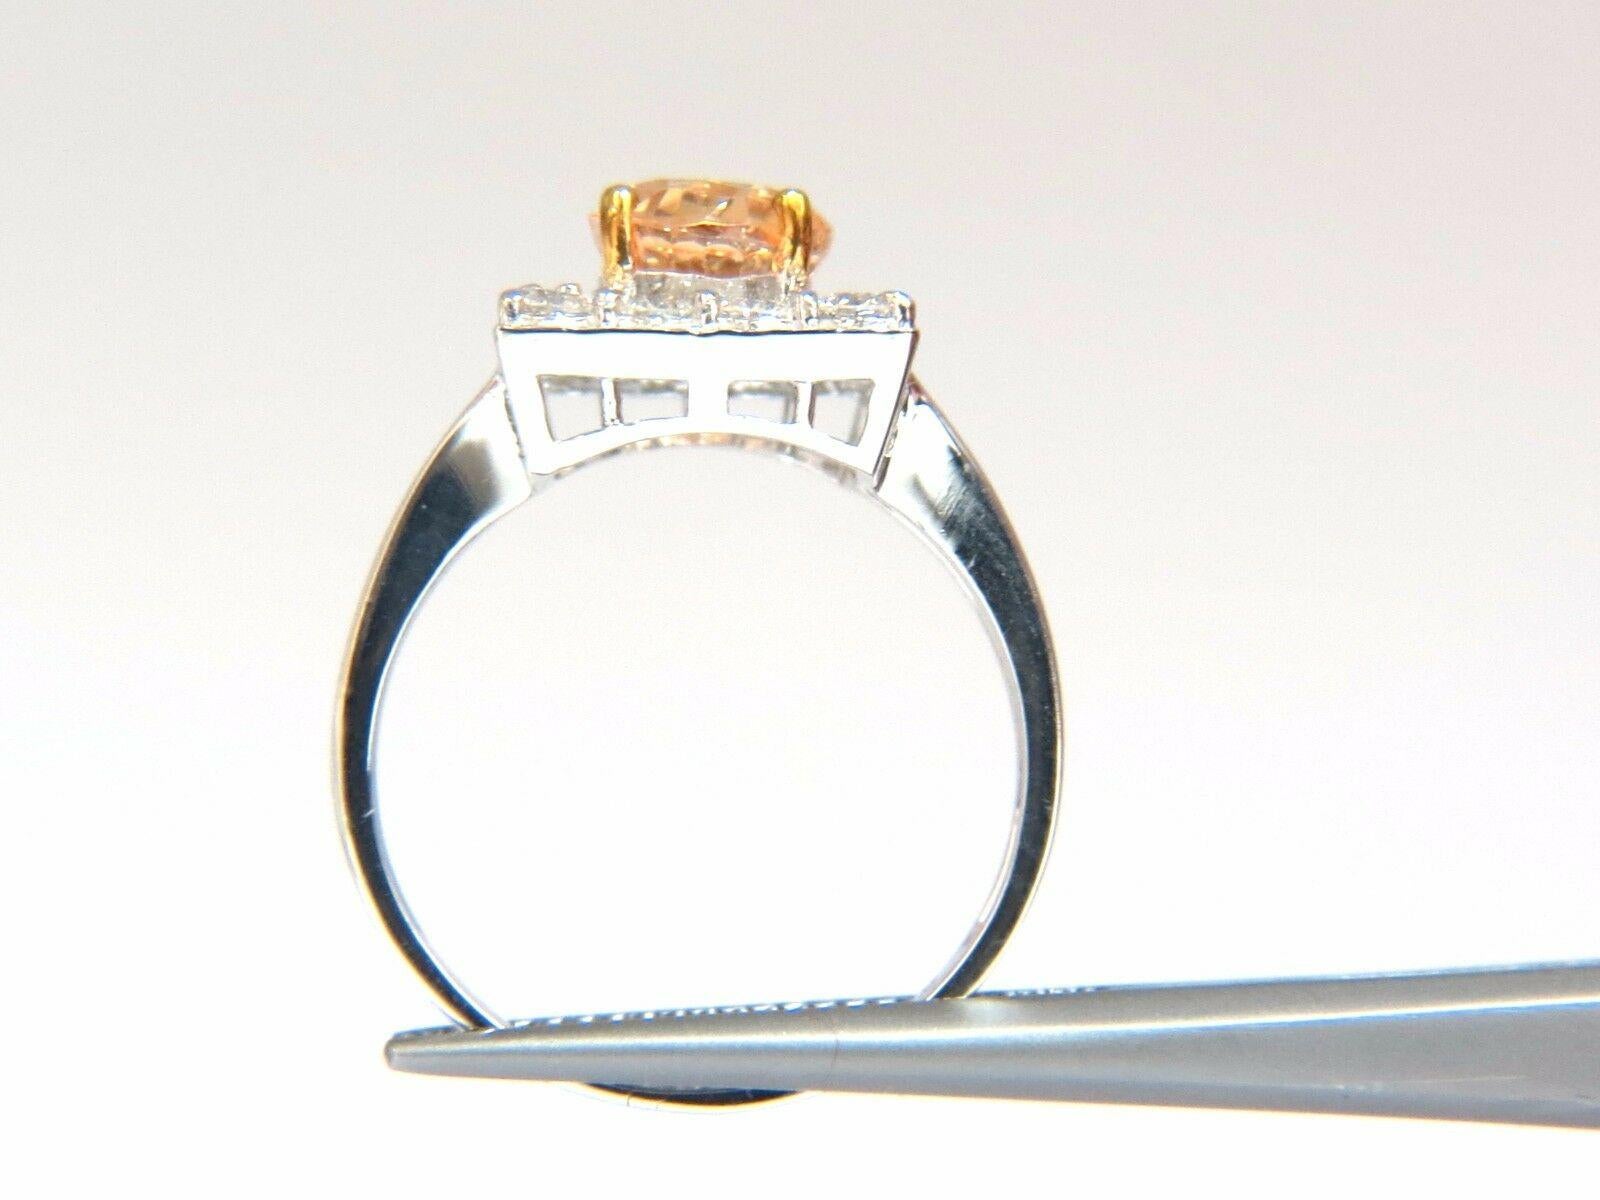 Oval Cut GIA Certified 2.26Ct Natural Yellow Orange Natural Sapphire Diamonds Ring 14kt